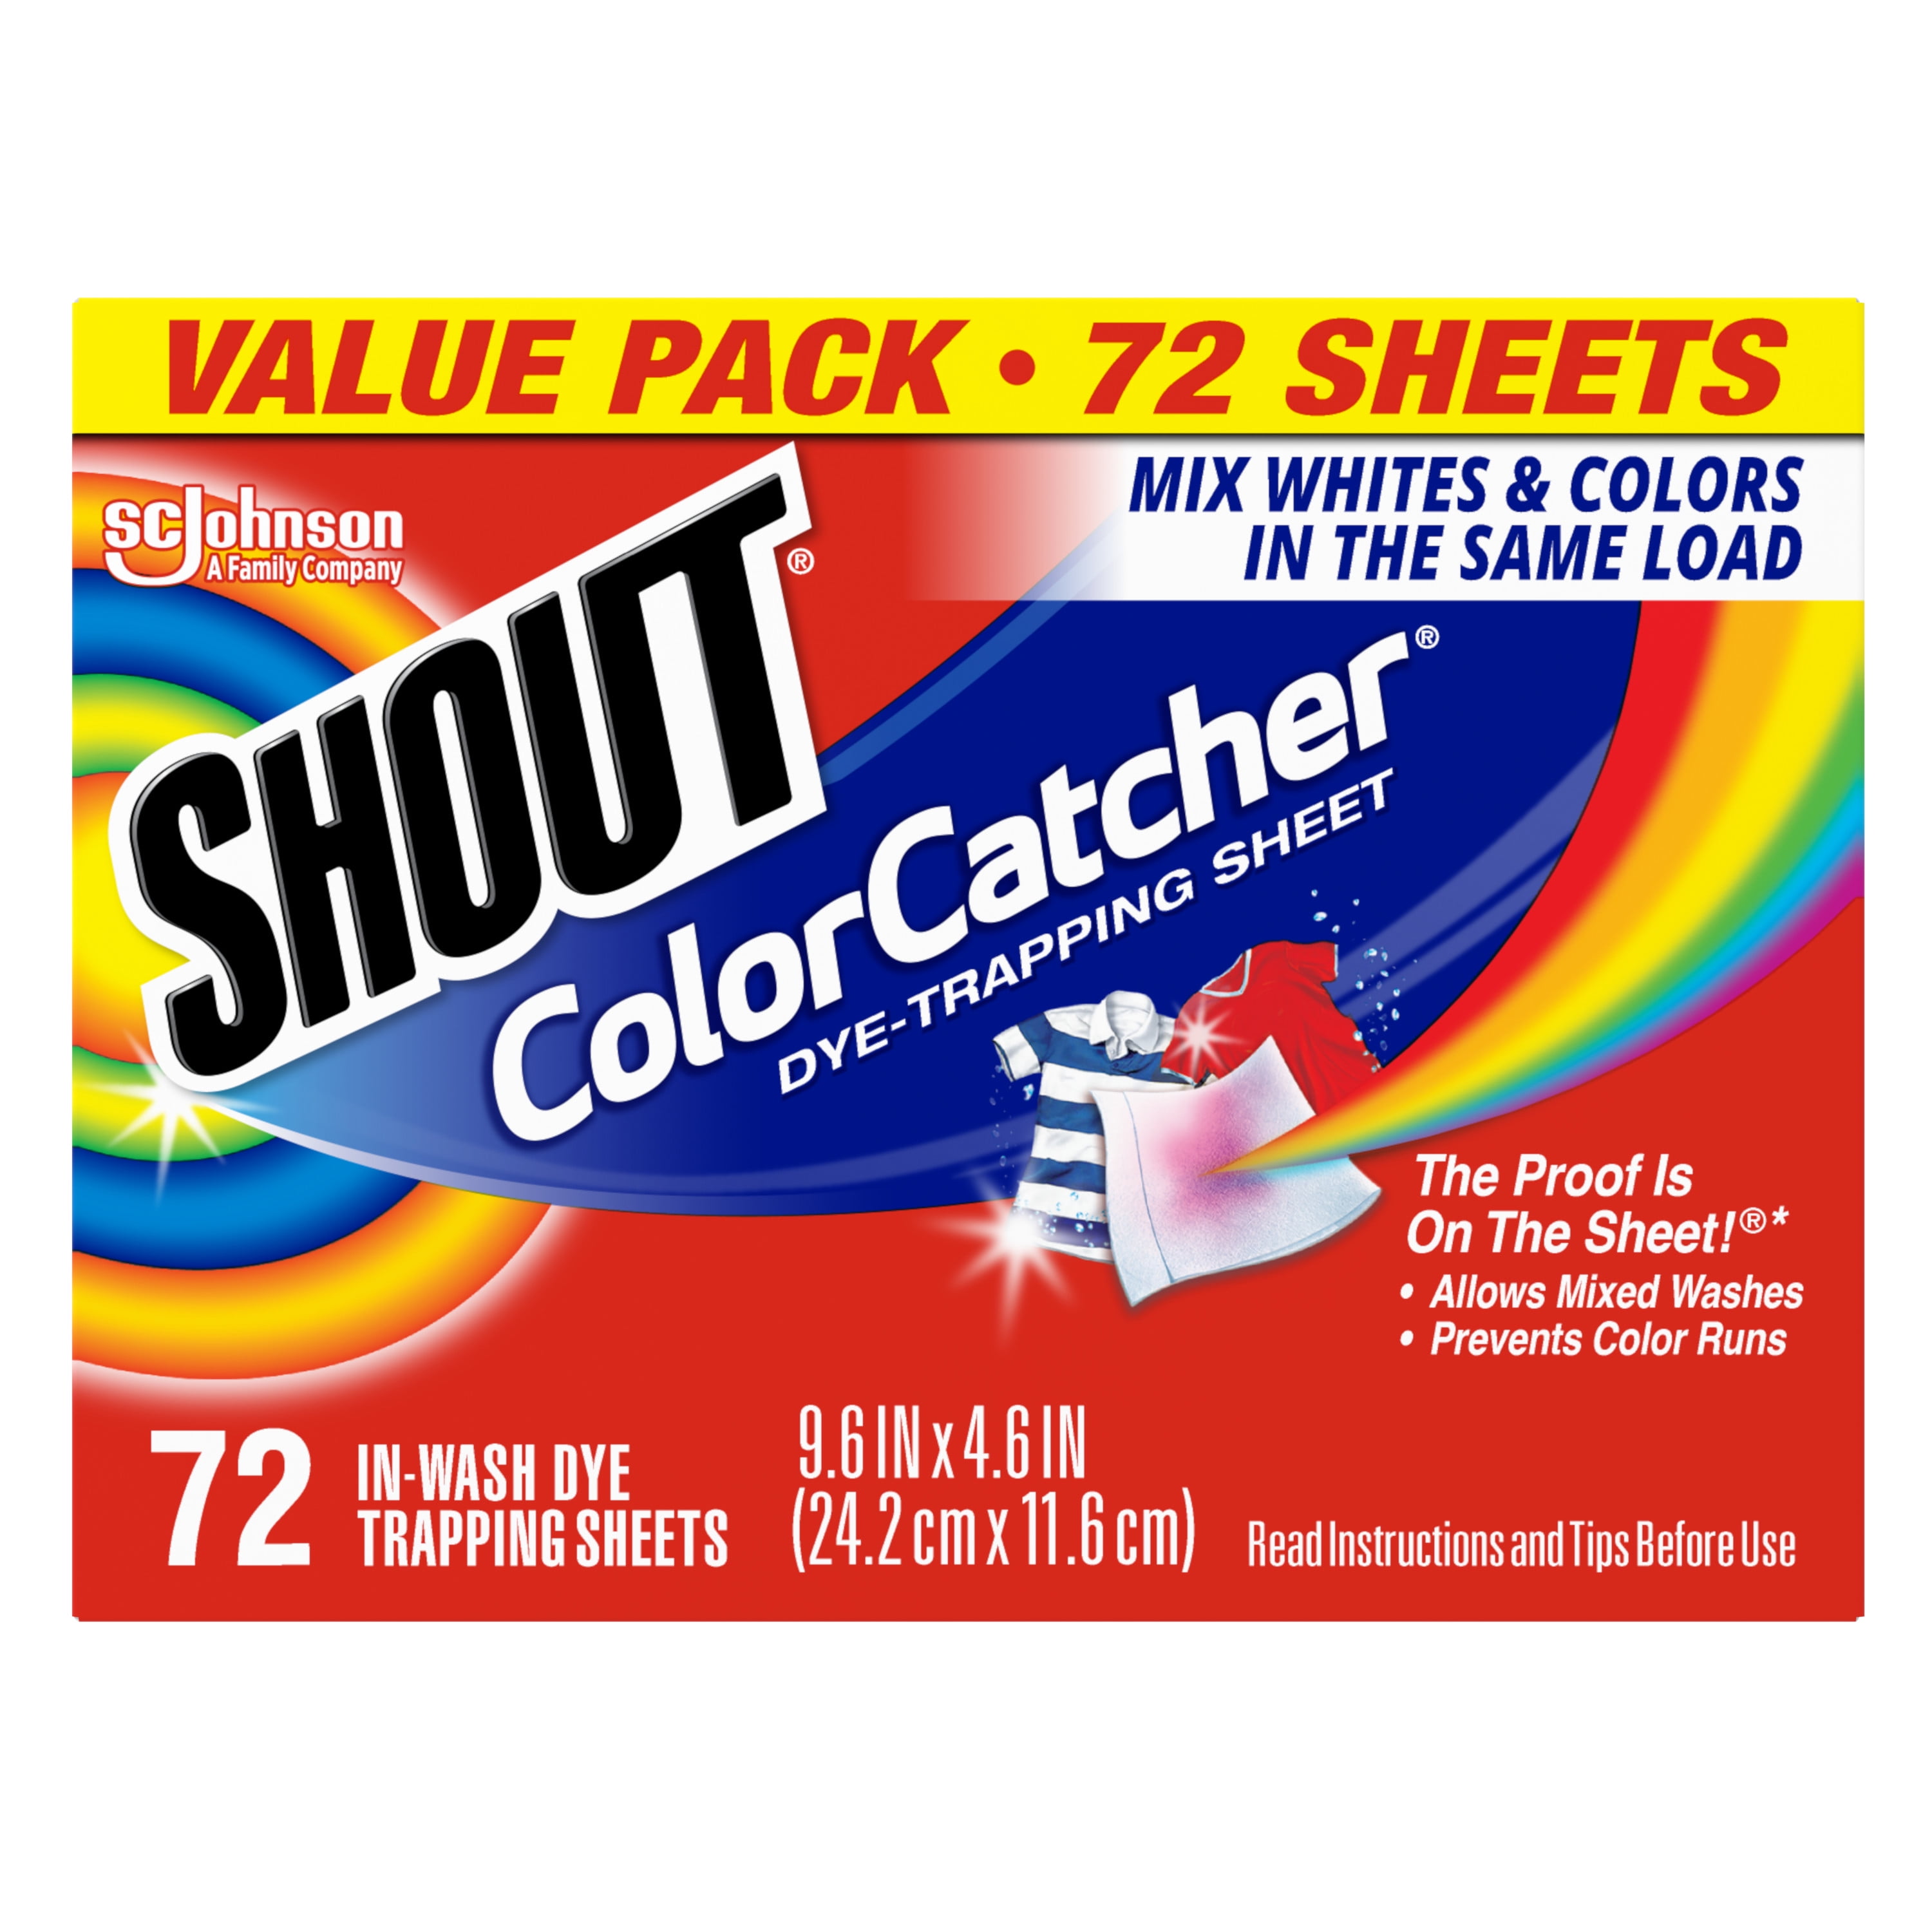 How Do Color Catcher Sheets Work? -XISI Non Wovens